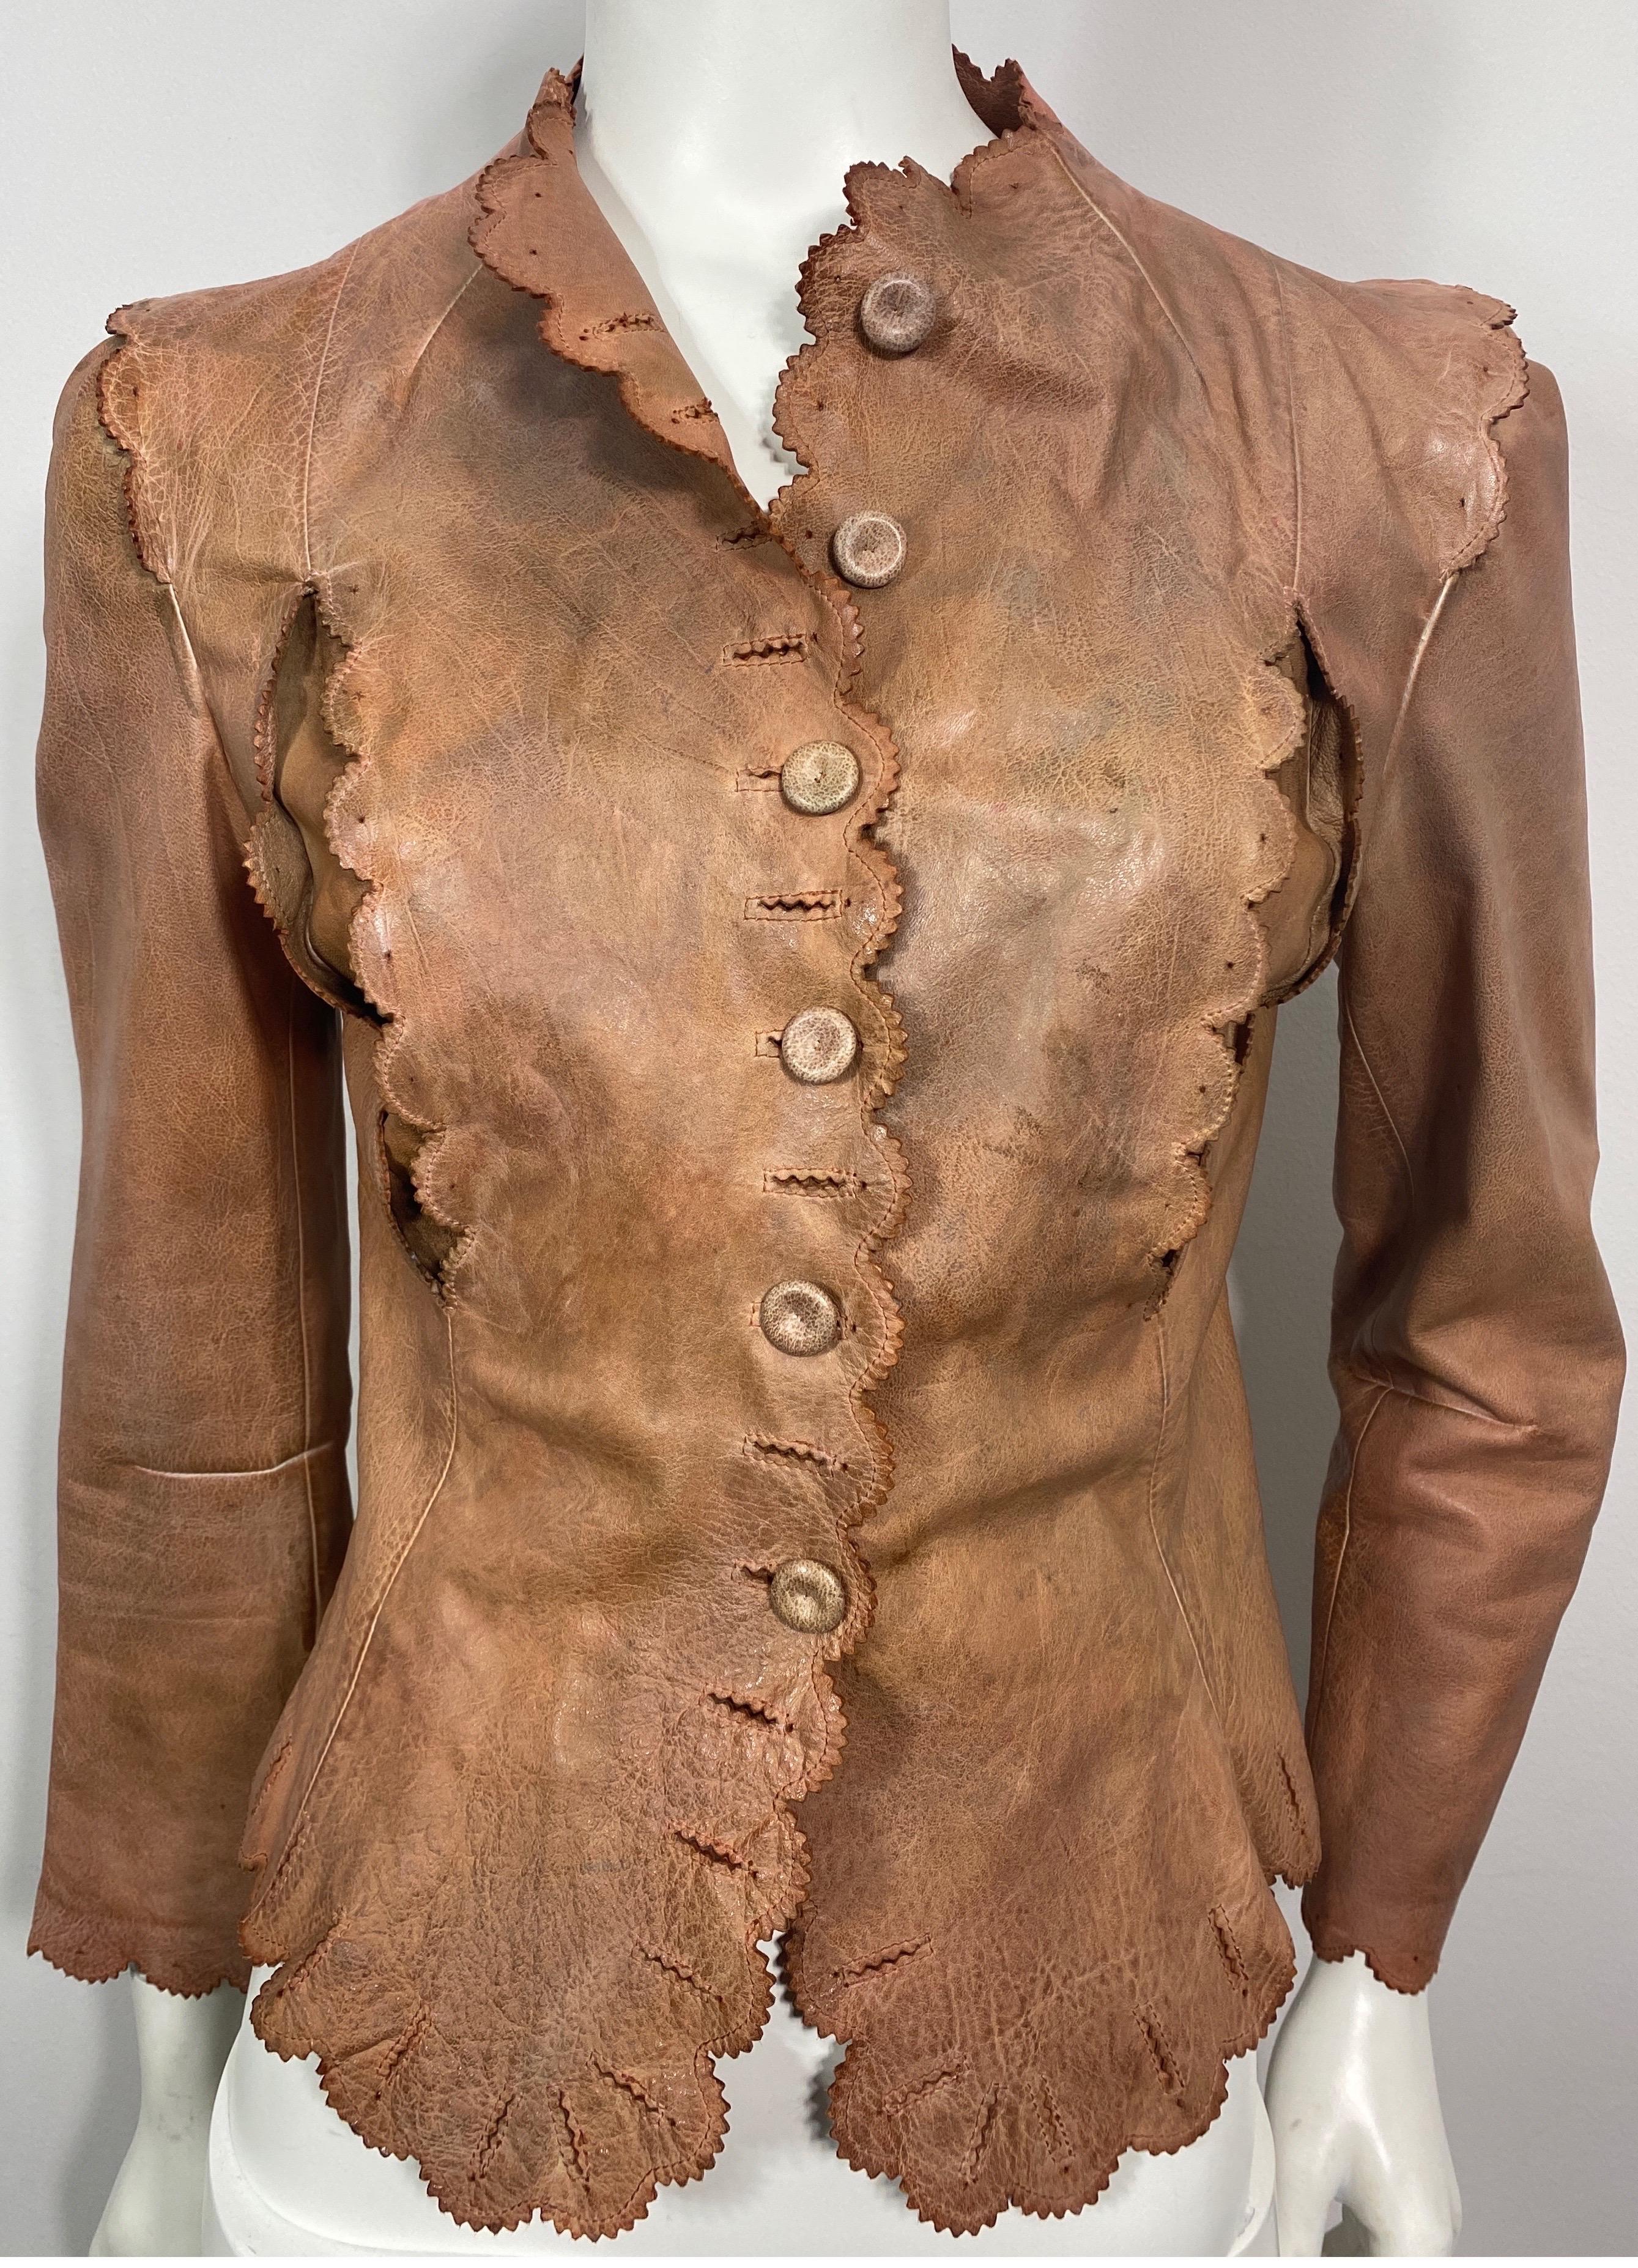 Alexander McQueen Dark Nude Distressed Leather Jacket-Size 40. This distressed leather jacket is in a dark nude color with certain areas being darker than others, the jacket has scalloped edges to it throughout with some inserts that have the same